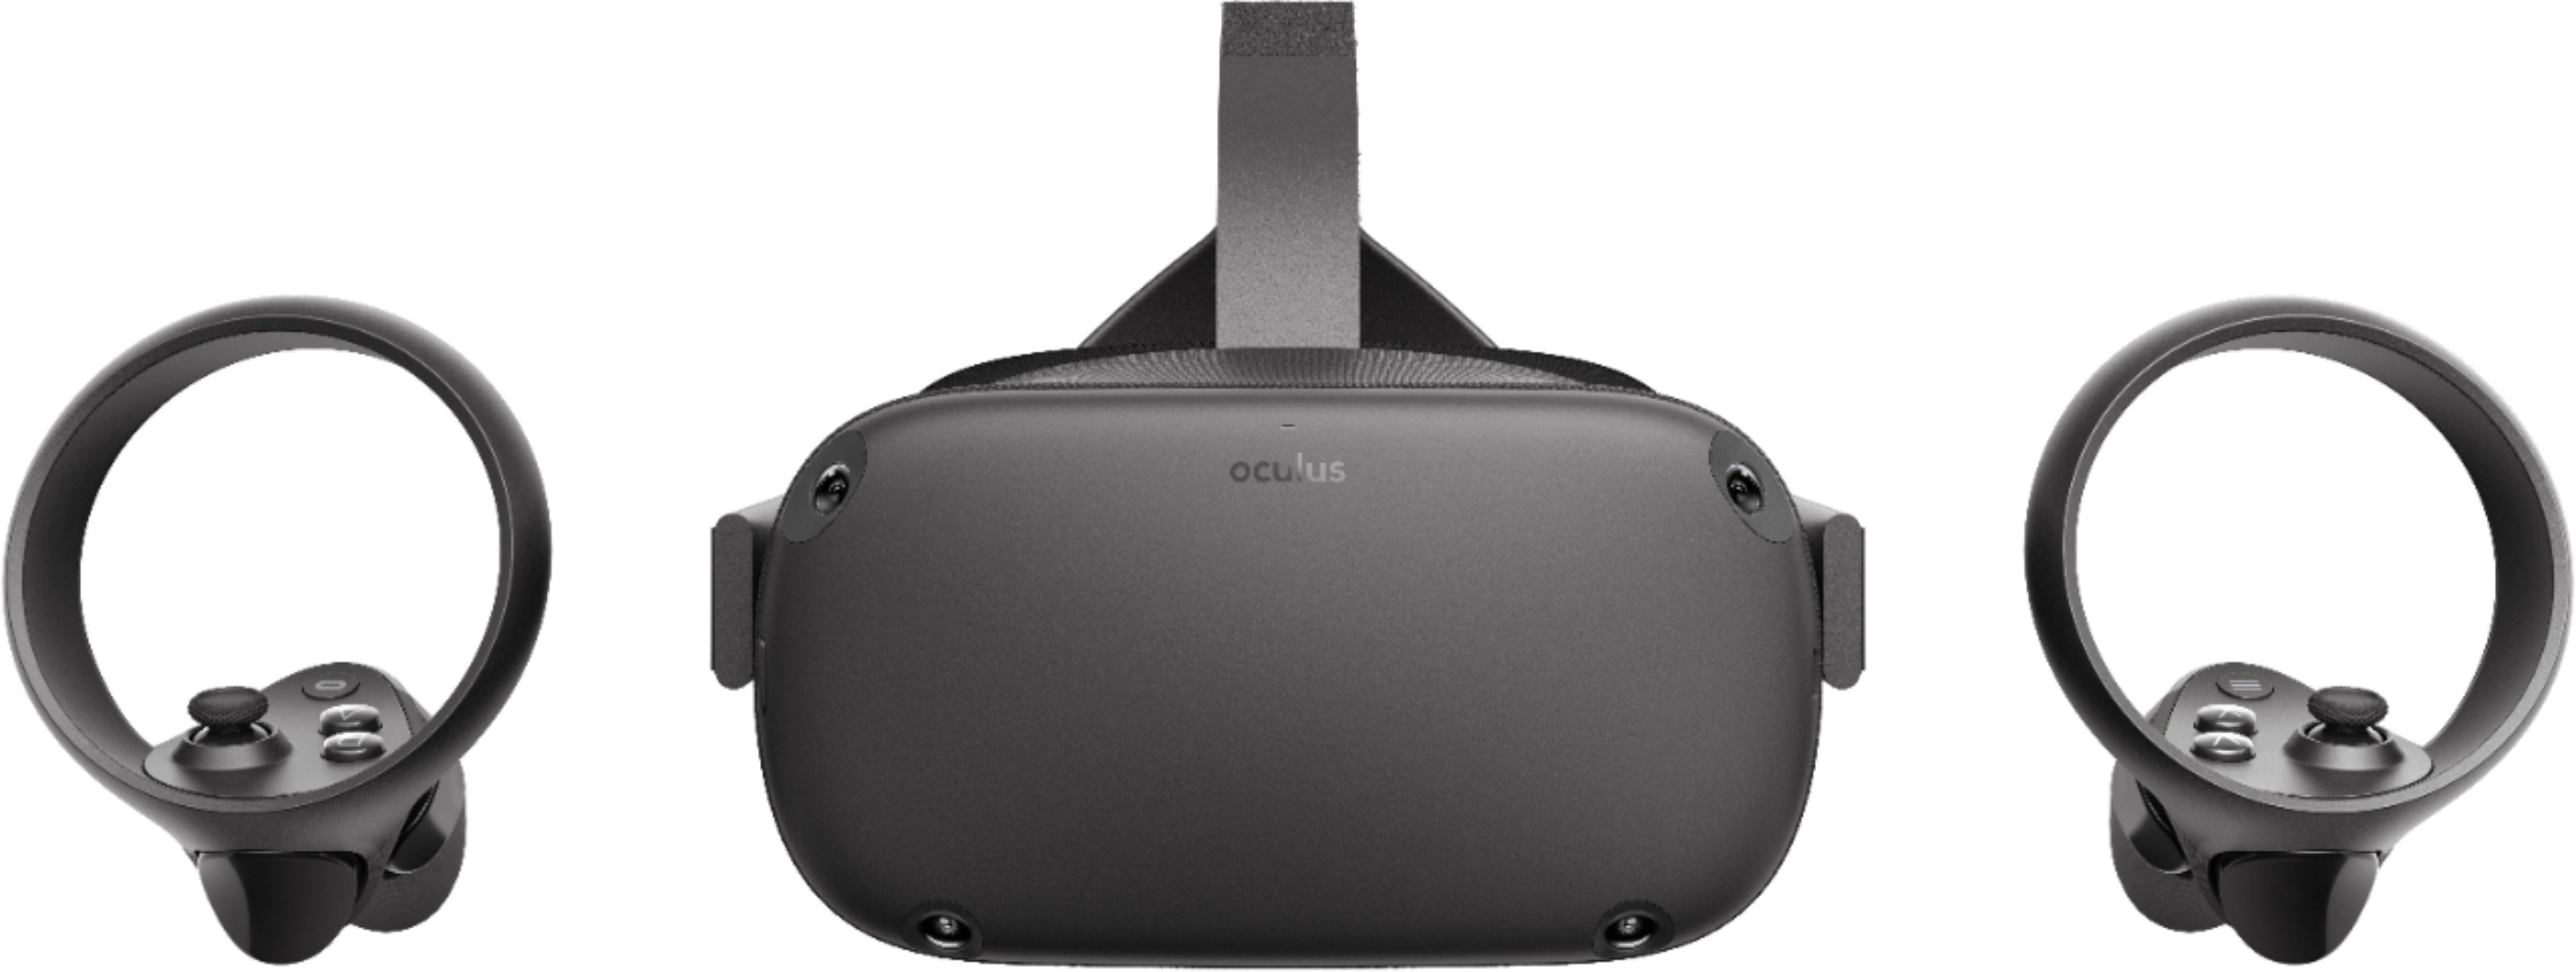 Best Buy: Oculus Quest All-in-one VR Gaming Headset 64GB